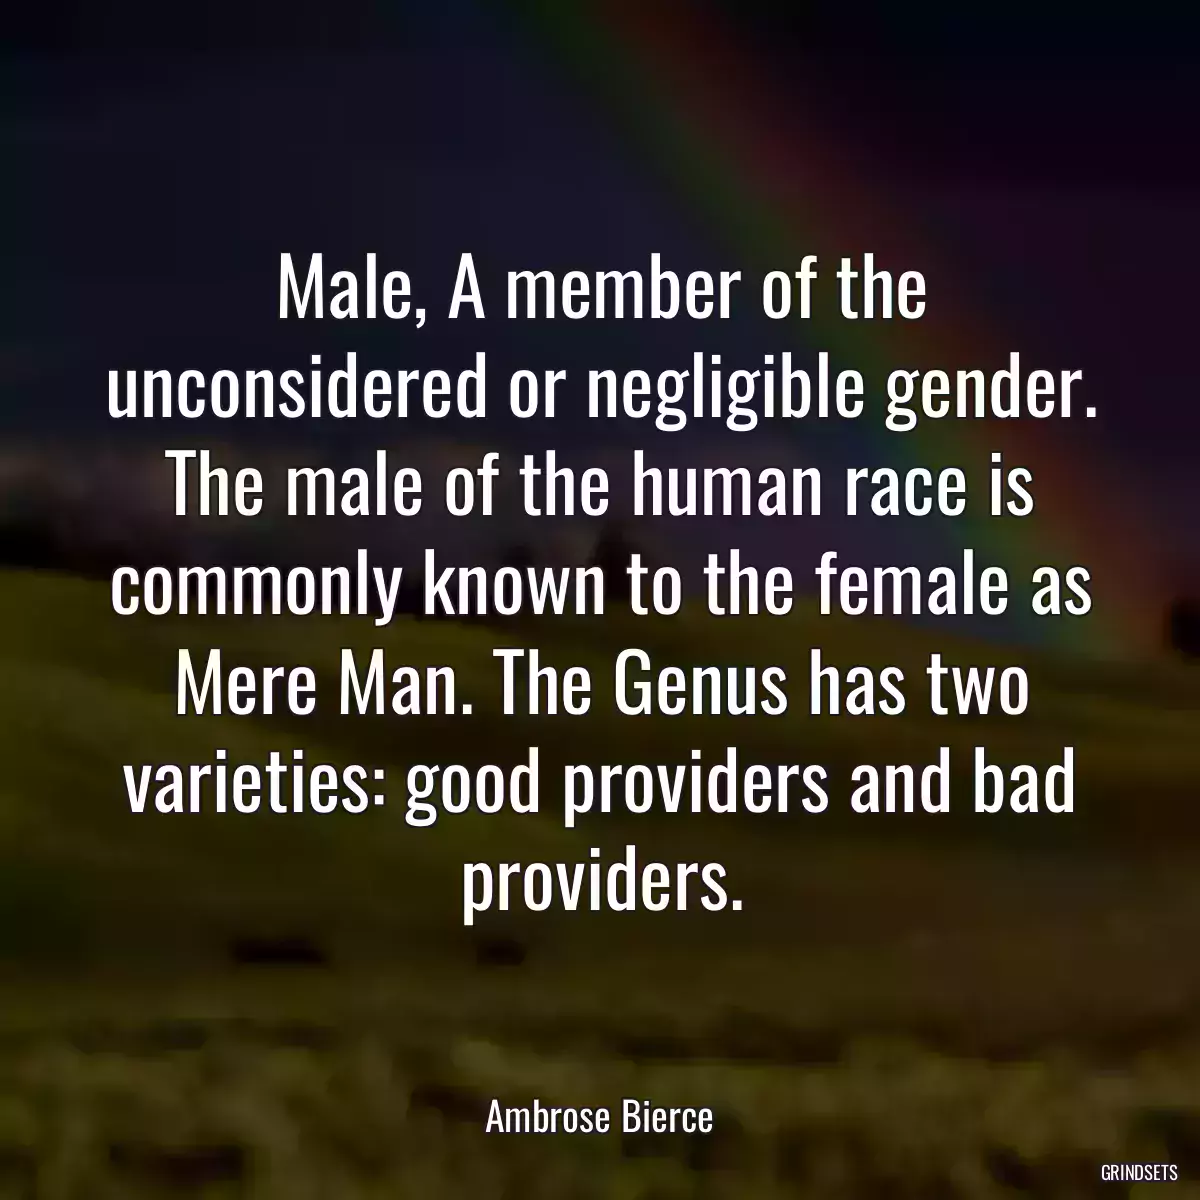 Male, A member of the unconsidered or negligible gender. The male of the human race is commonly known to the female as Mere Man. The Genus has two varieties: good providers and bad providers.